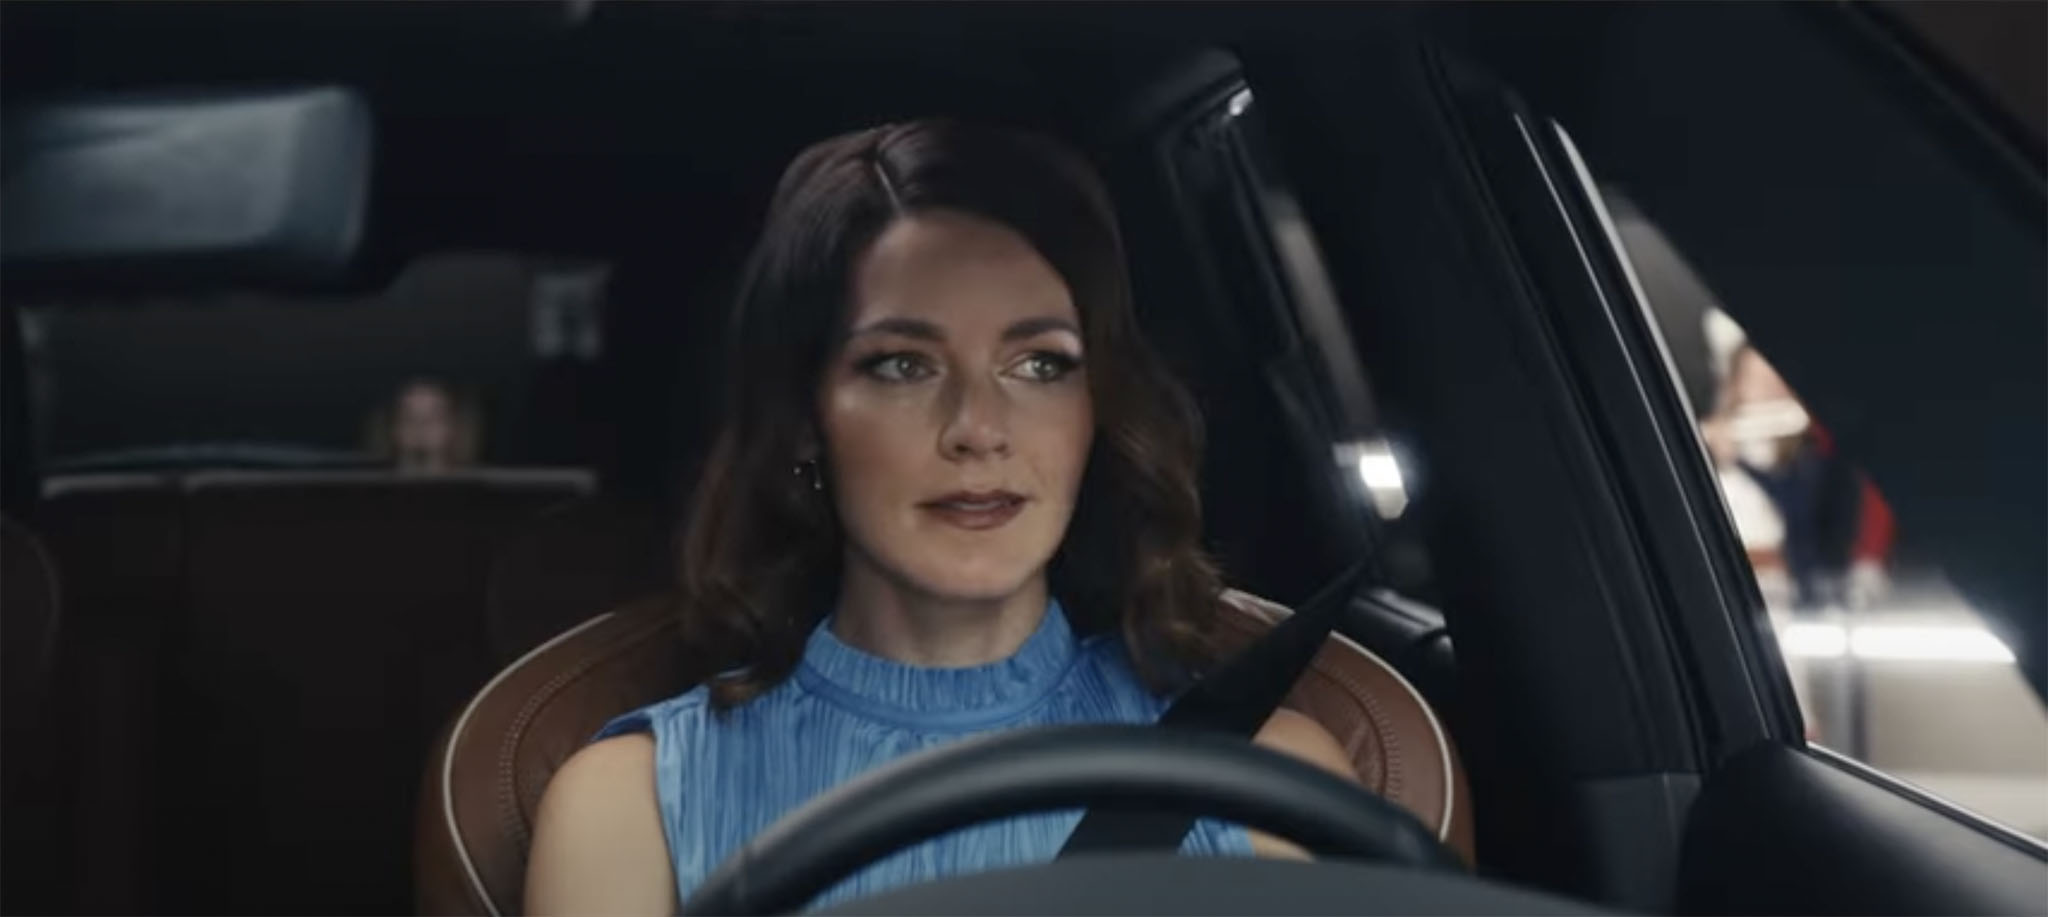 The INFINITI QX60 commercial shows a brunette woman rolling up her window so she doesn't hear the kids' rendition of Richard Strauss’ “Also sprach Zarathustra”